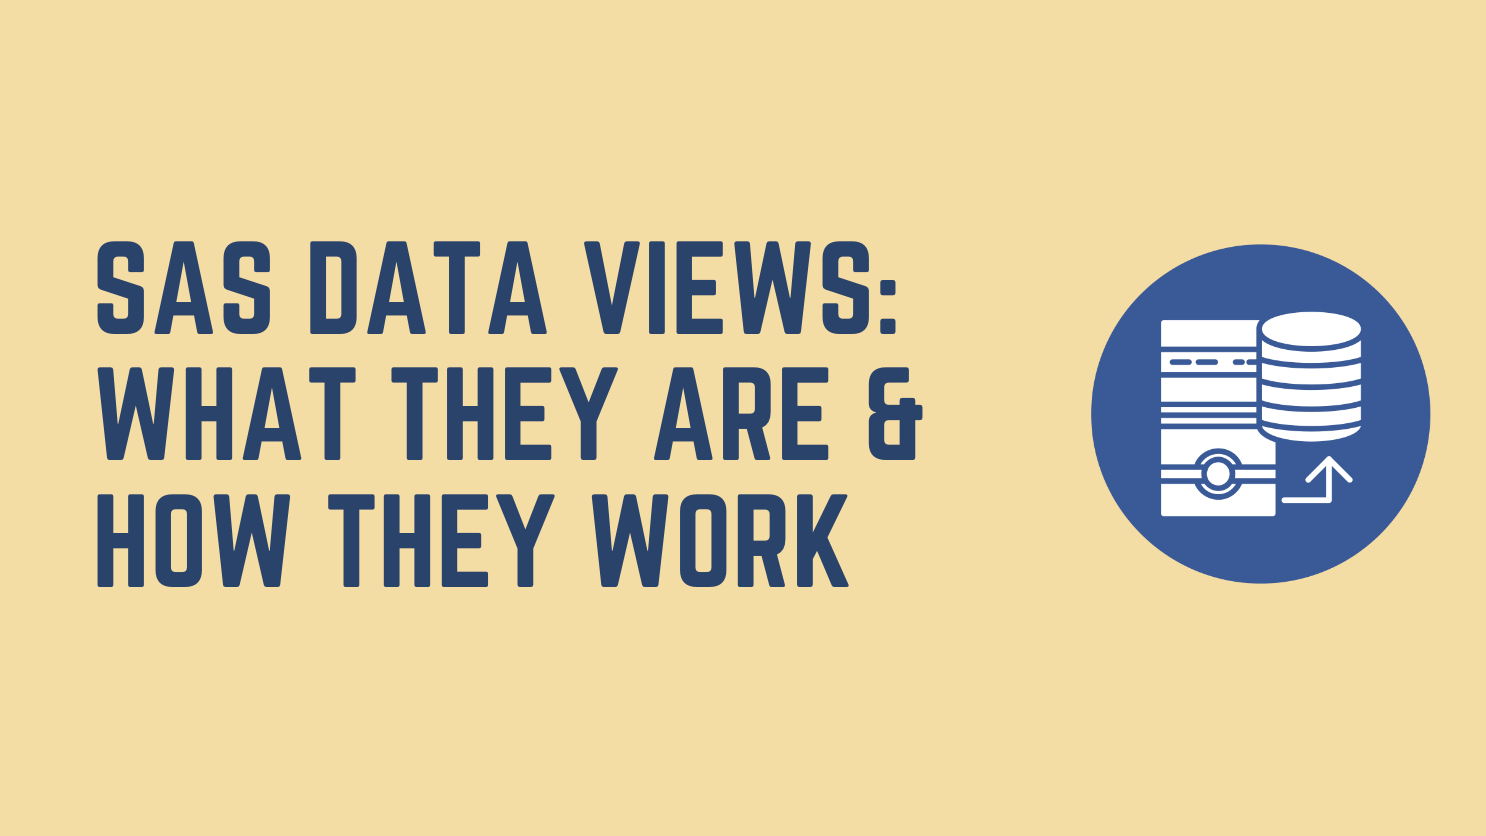 SAS Data Views: What They Are & How They Work